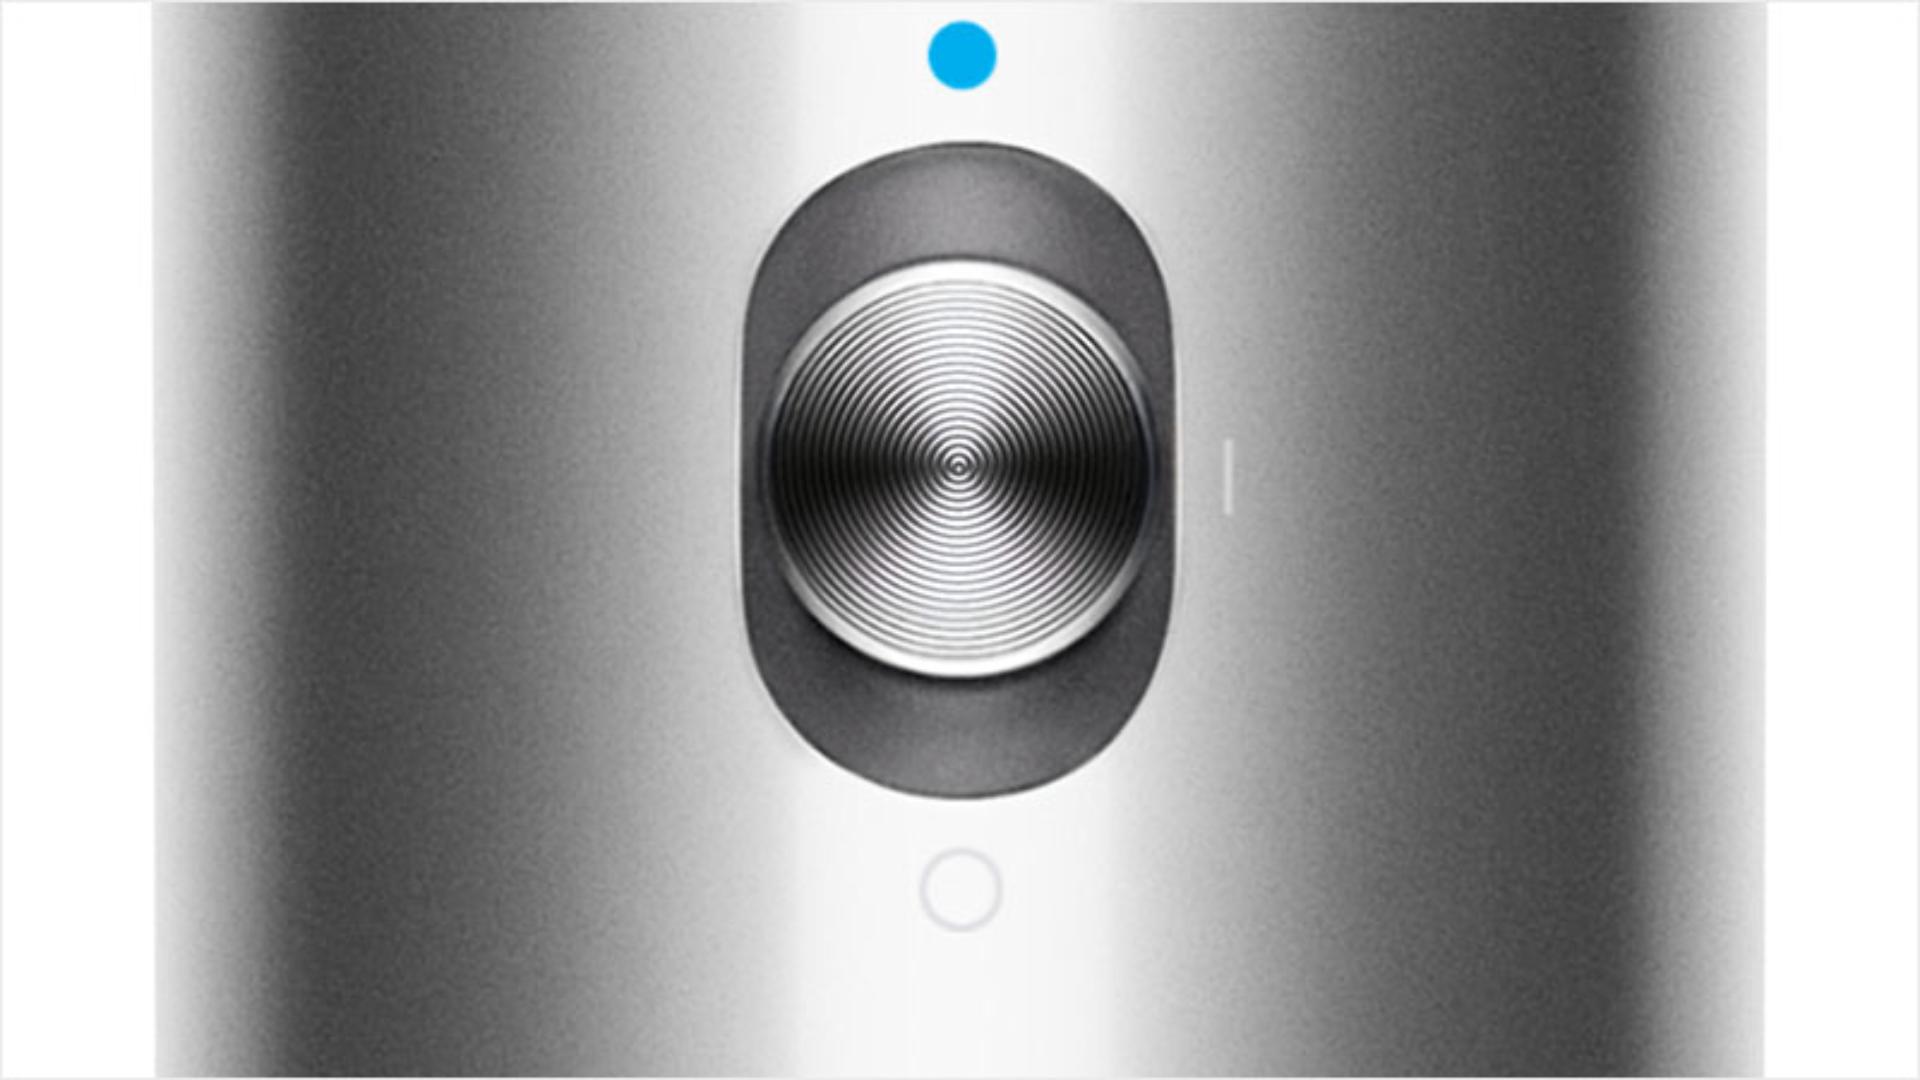 The cold shot button on the Dyson Airwrap multi-styler.